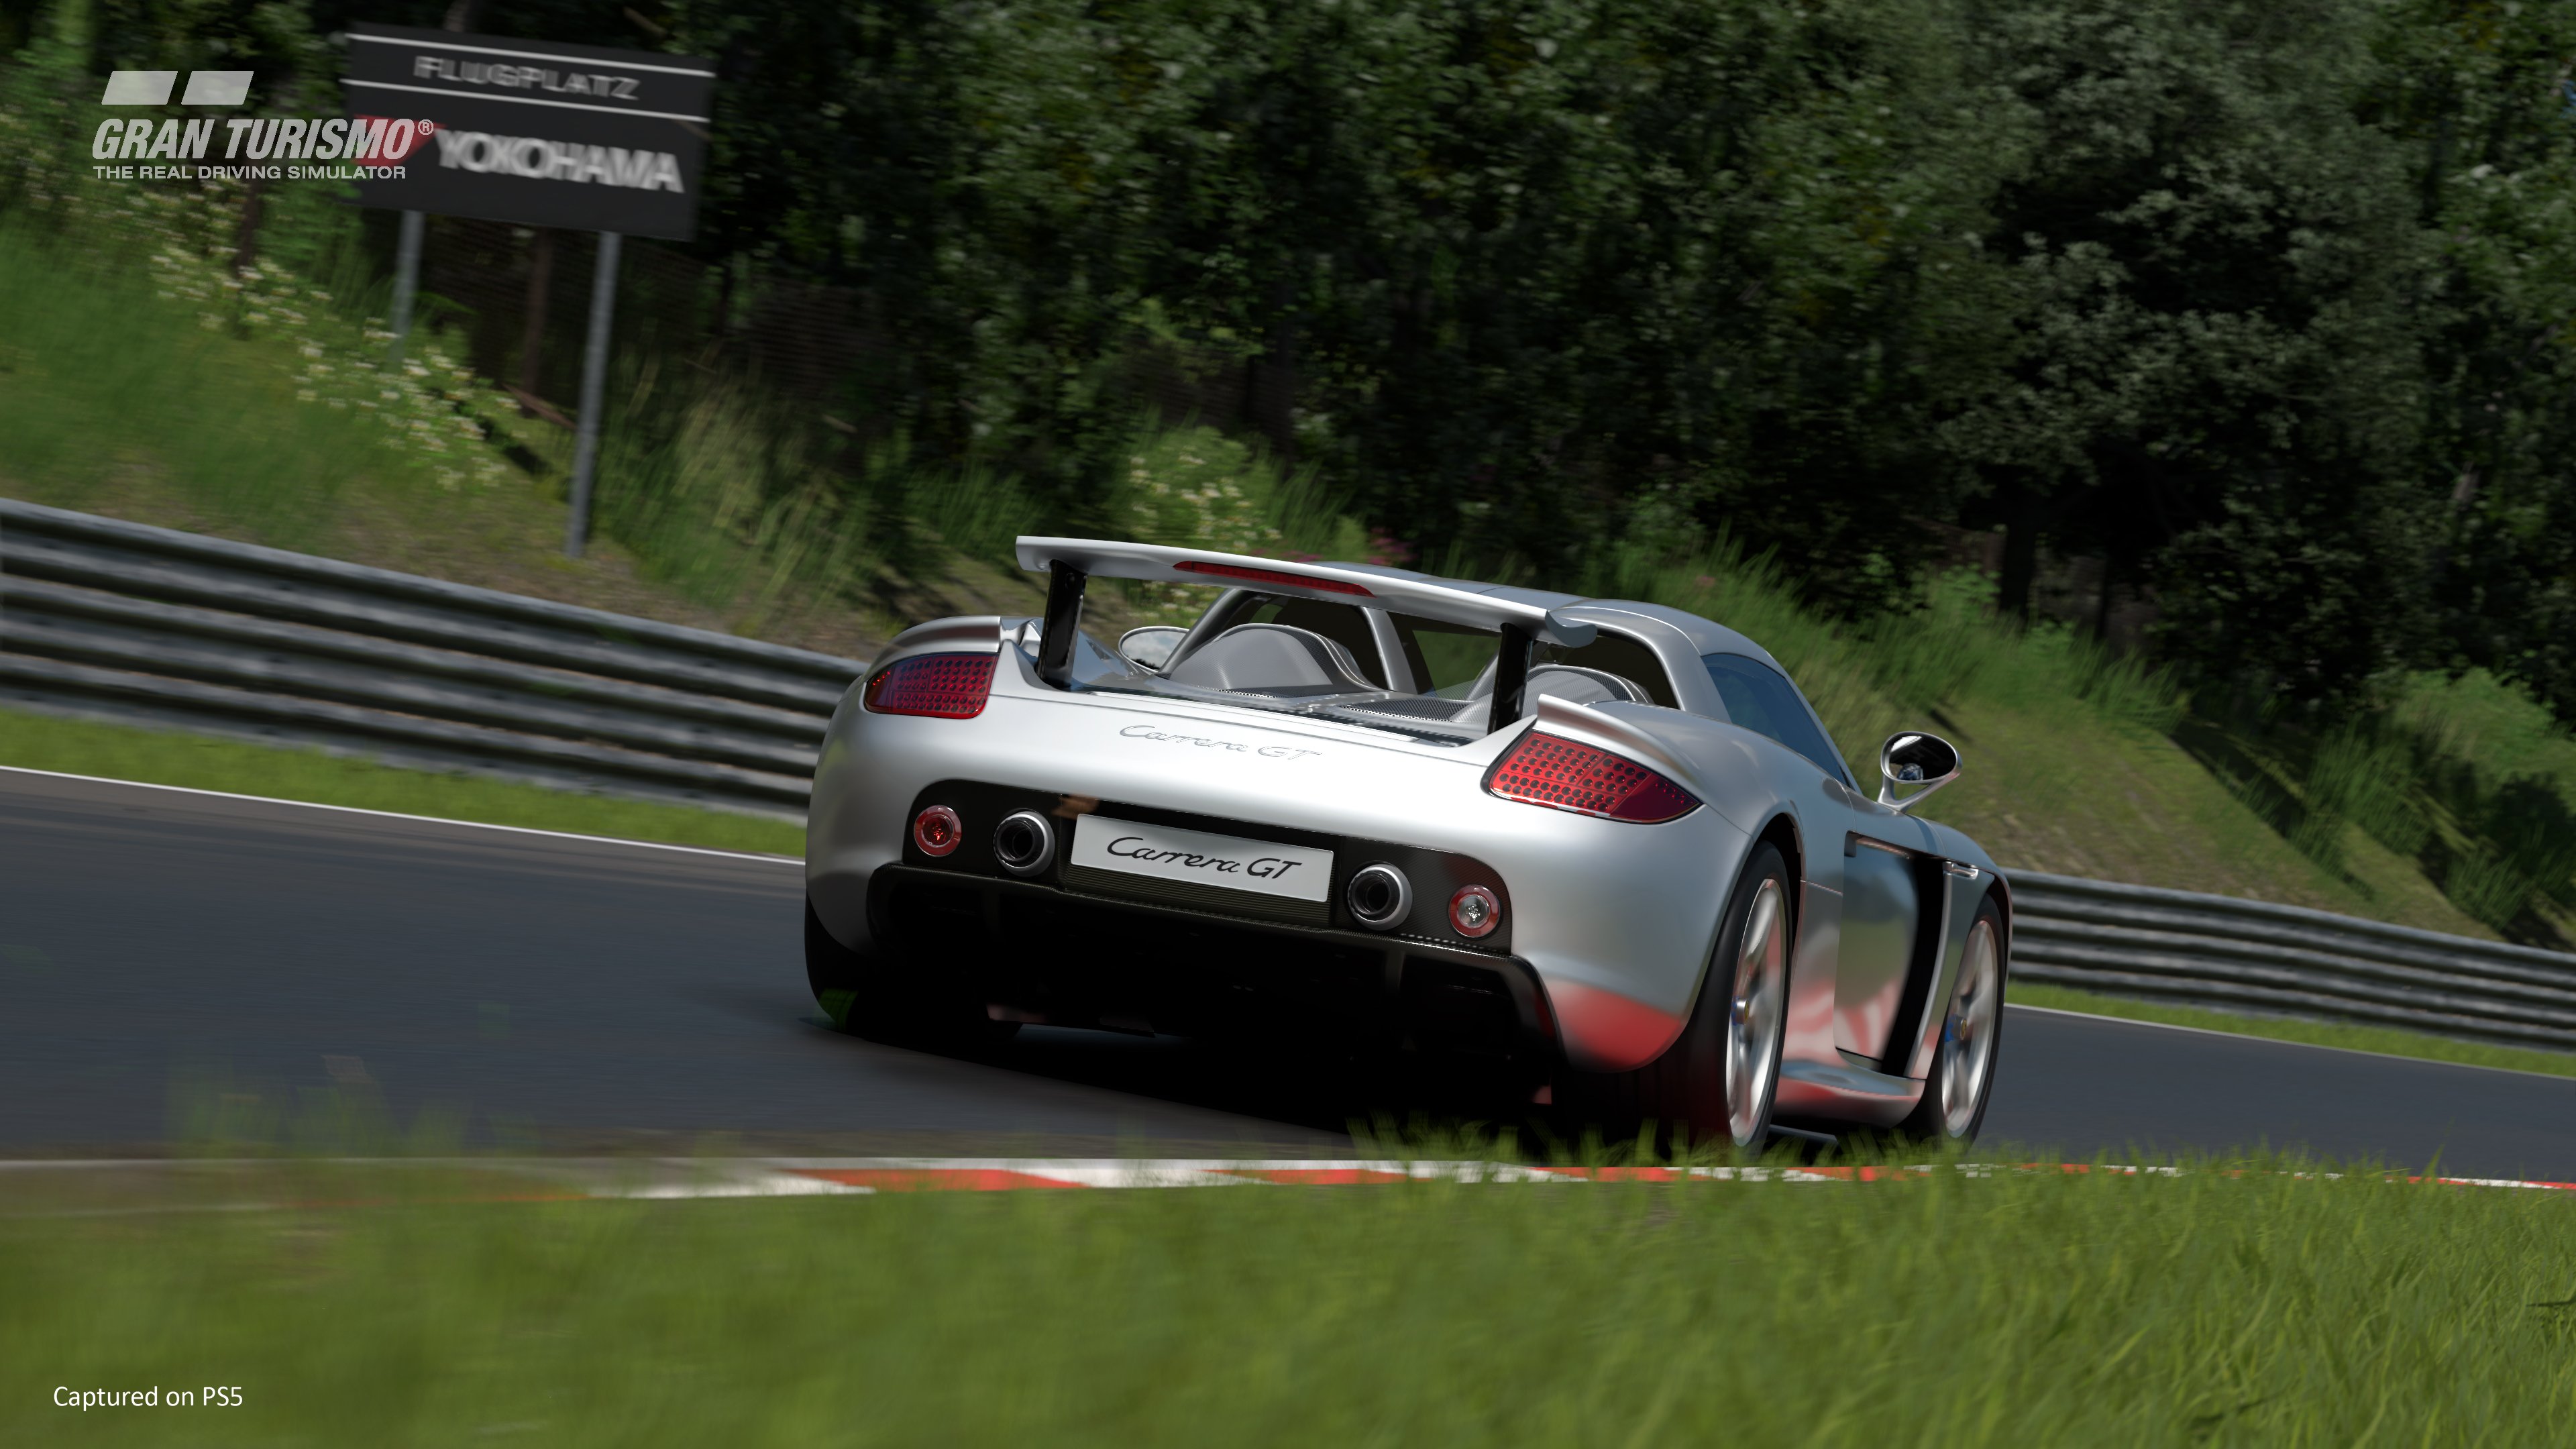 Gran Turismo 7 patch 1.11 increases in-game rewards